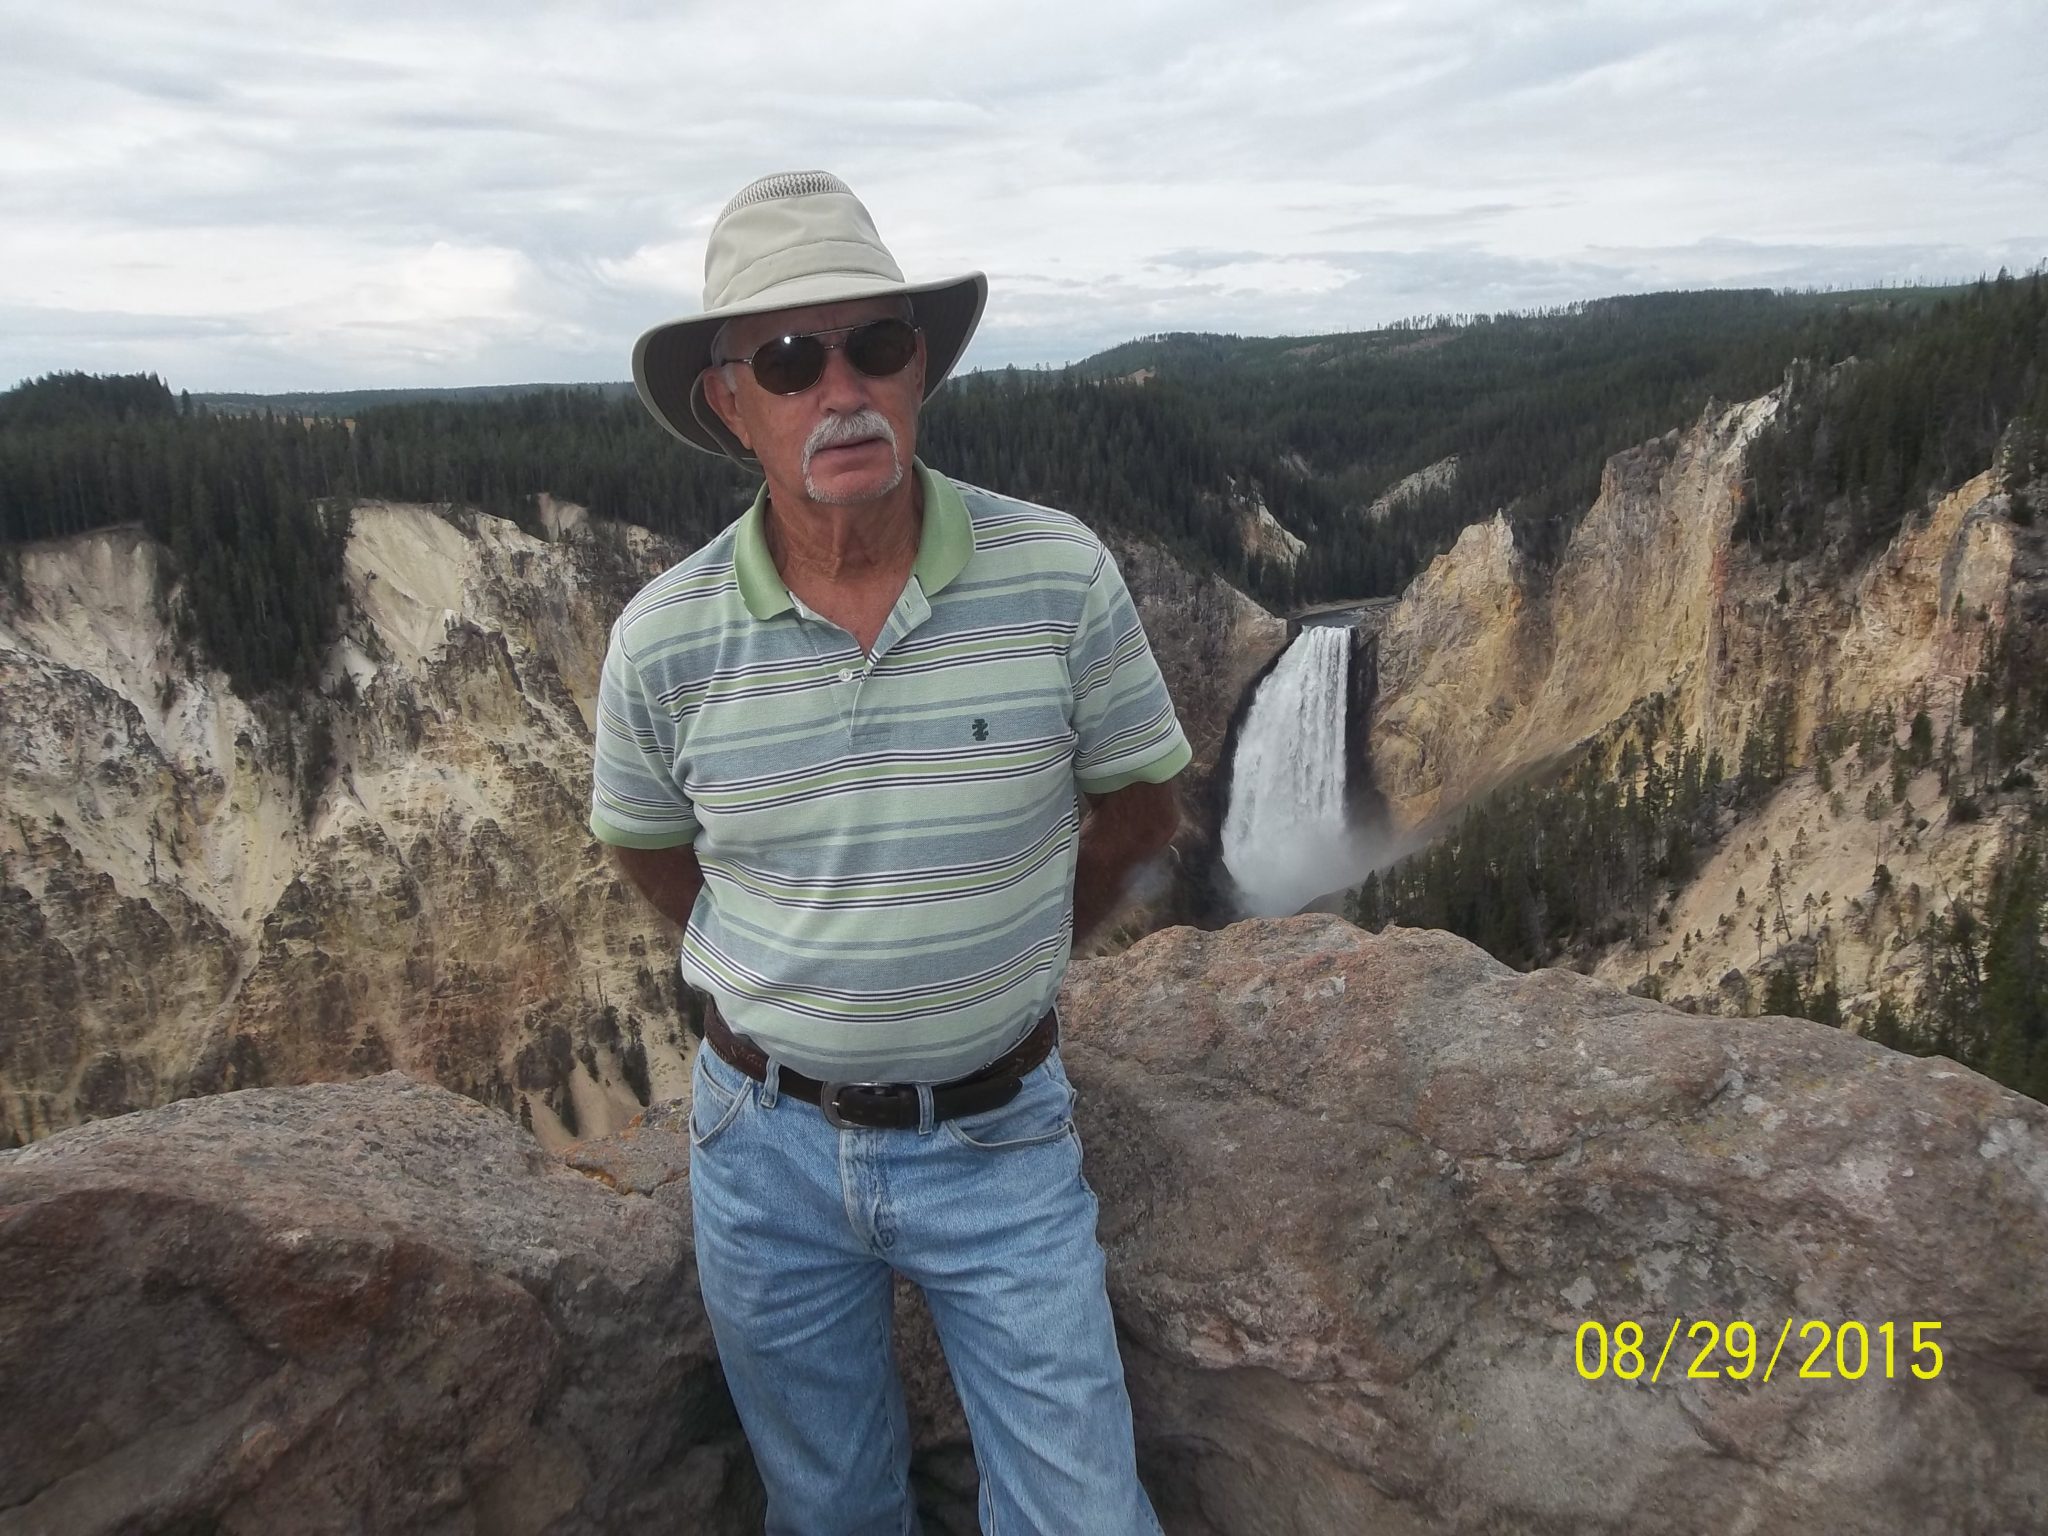 Grand canyon of the Yellowstone. Another great trip hiking the National Parks.